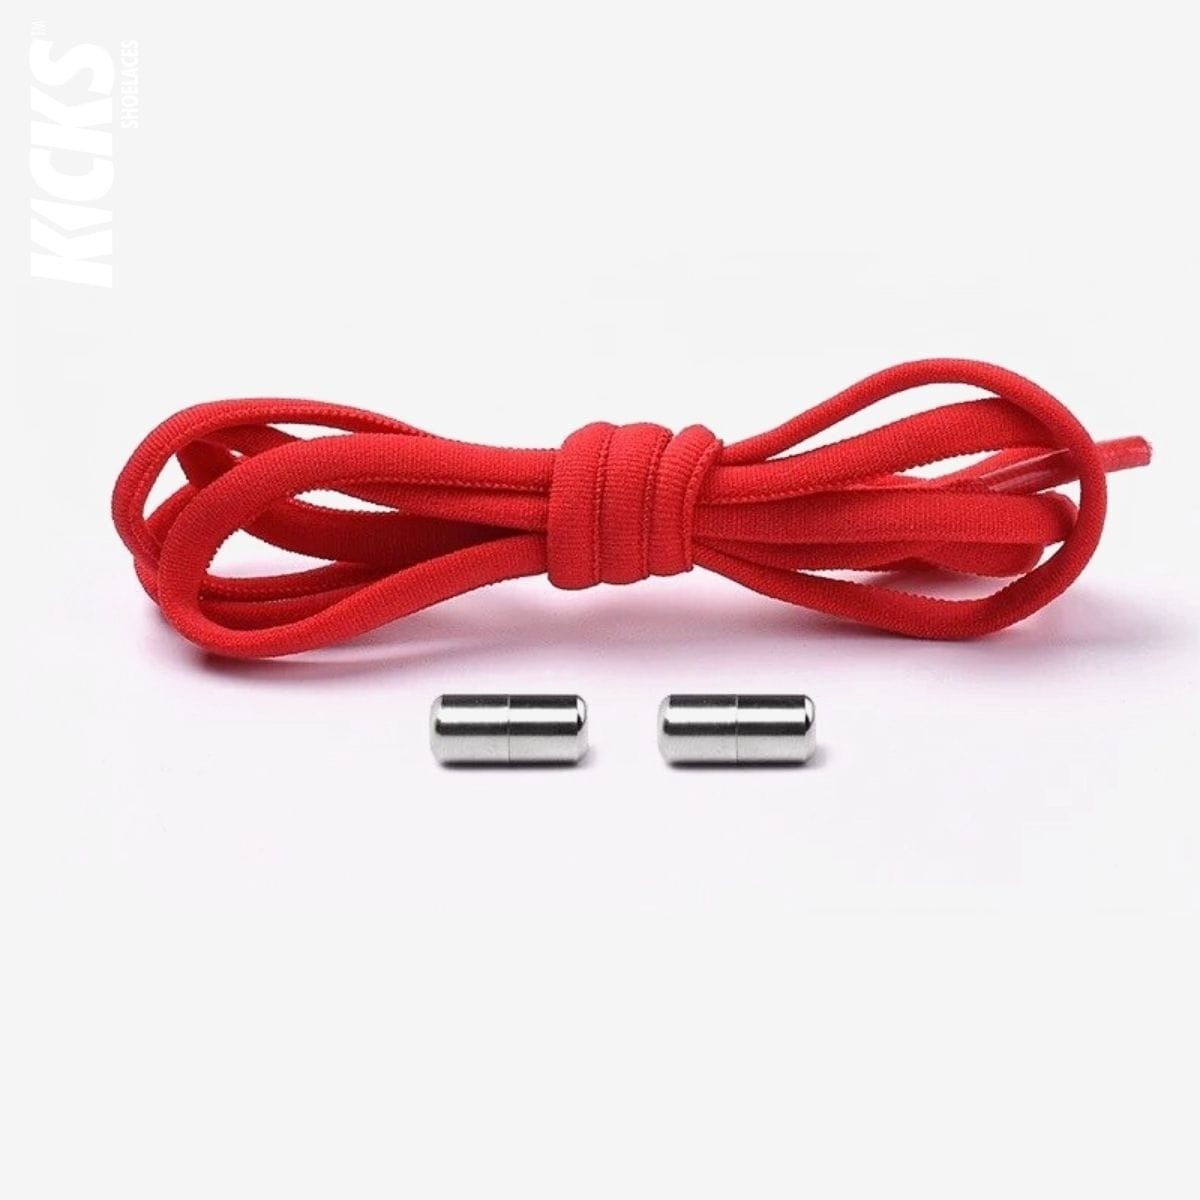 red-kids-elastic-no-tie-shoe-laces-for-sneakers-by-kicks-shoelaces